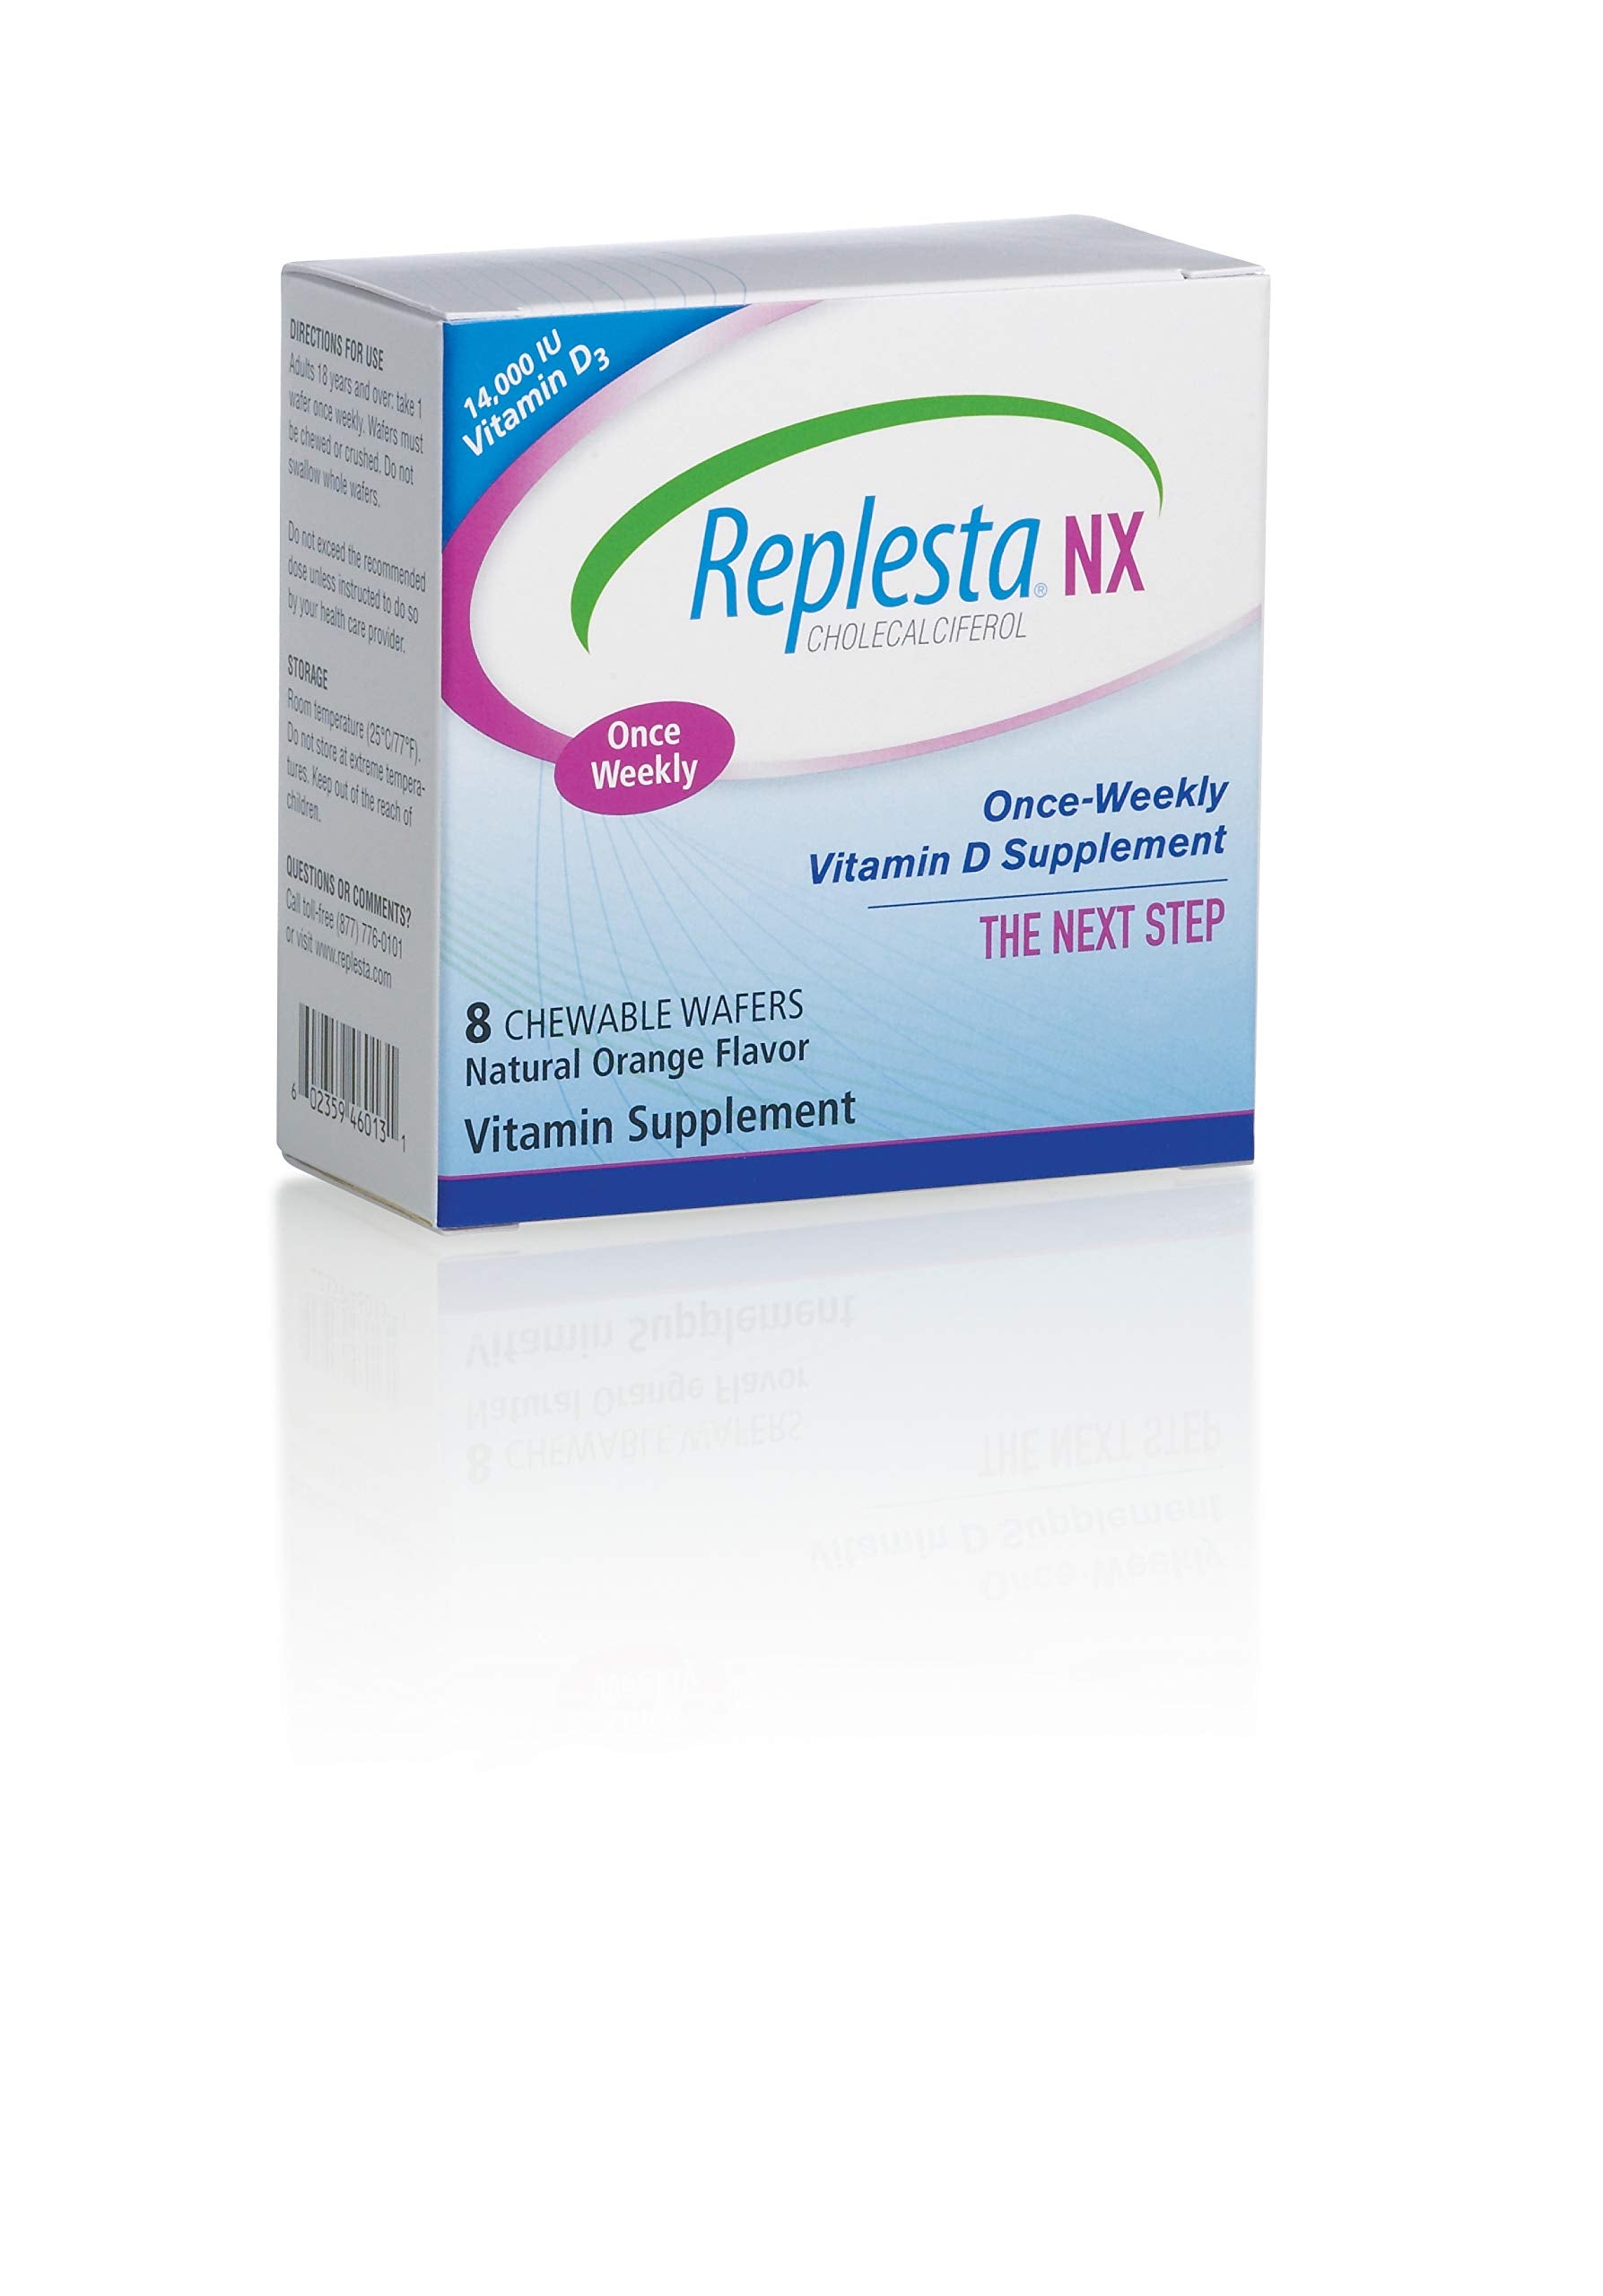 Replesta NX 14,000 IU Vitamin D3 Cholecalciferol, for Vitamin D Deficiency, Once-Weekly Chewable Wafer, Non-GMO, Natural Orange Flavor, 8 Tablets